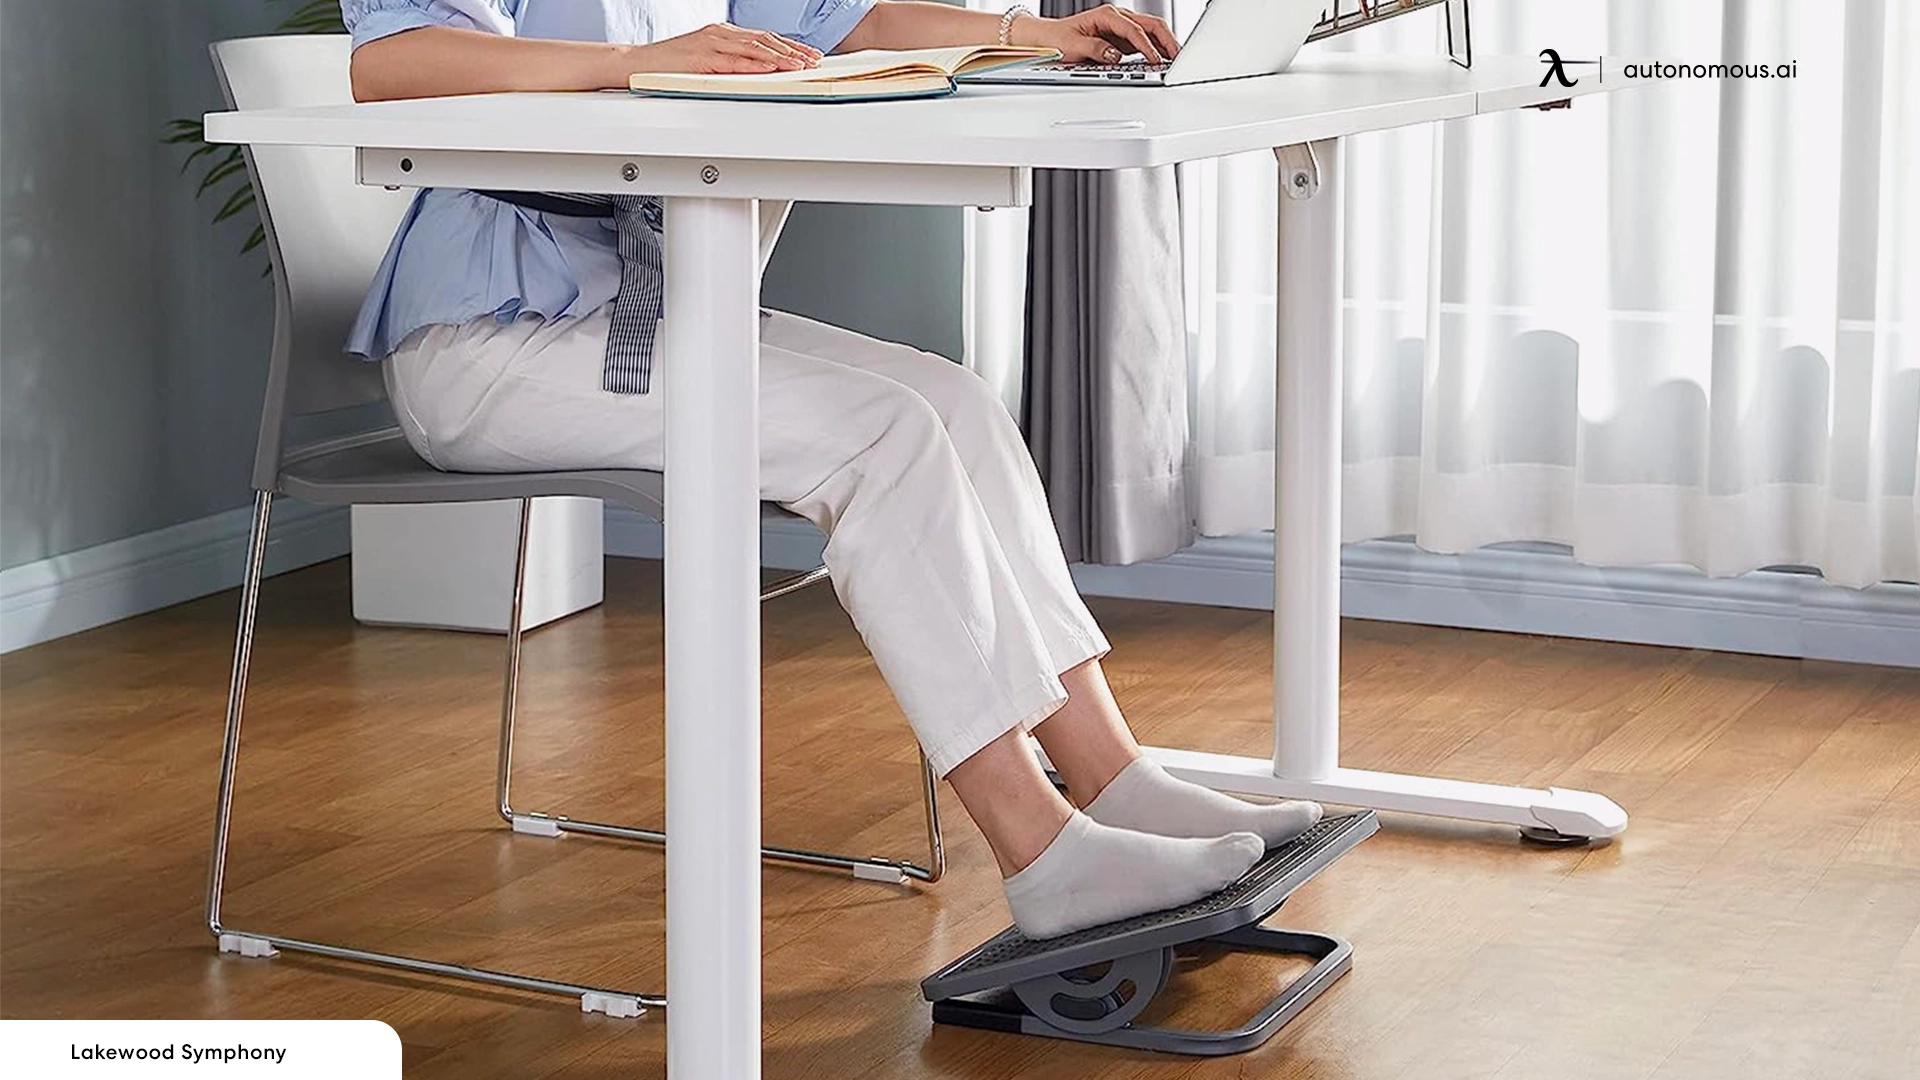 What Makes a Good Office Footrest?